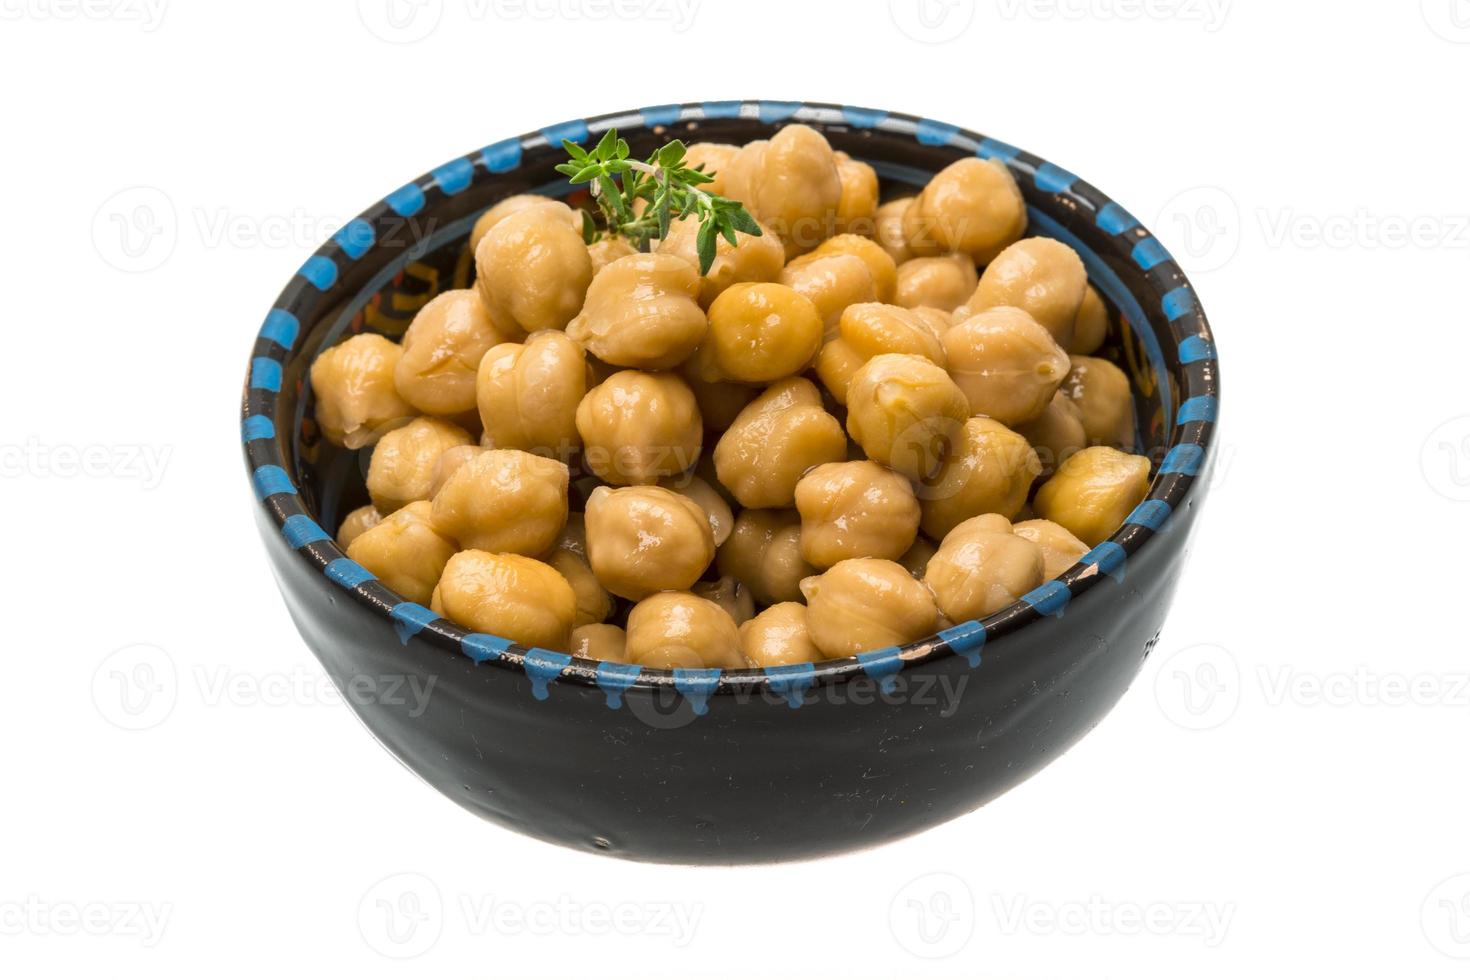 Peas nut in a bowl on white background photo